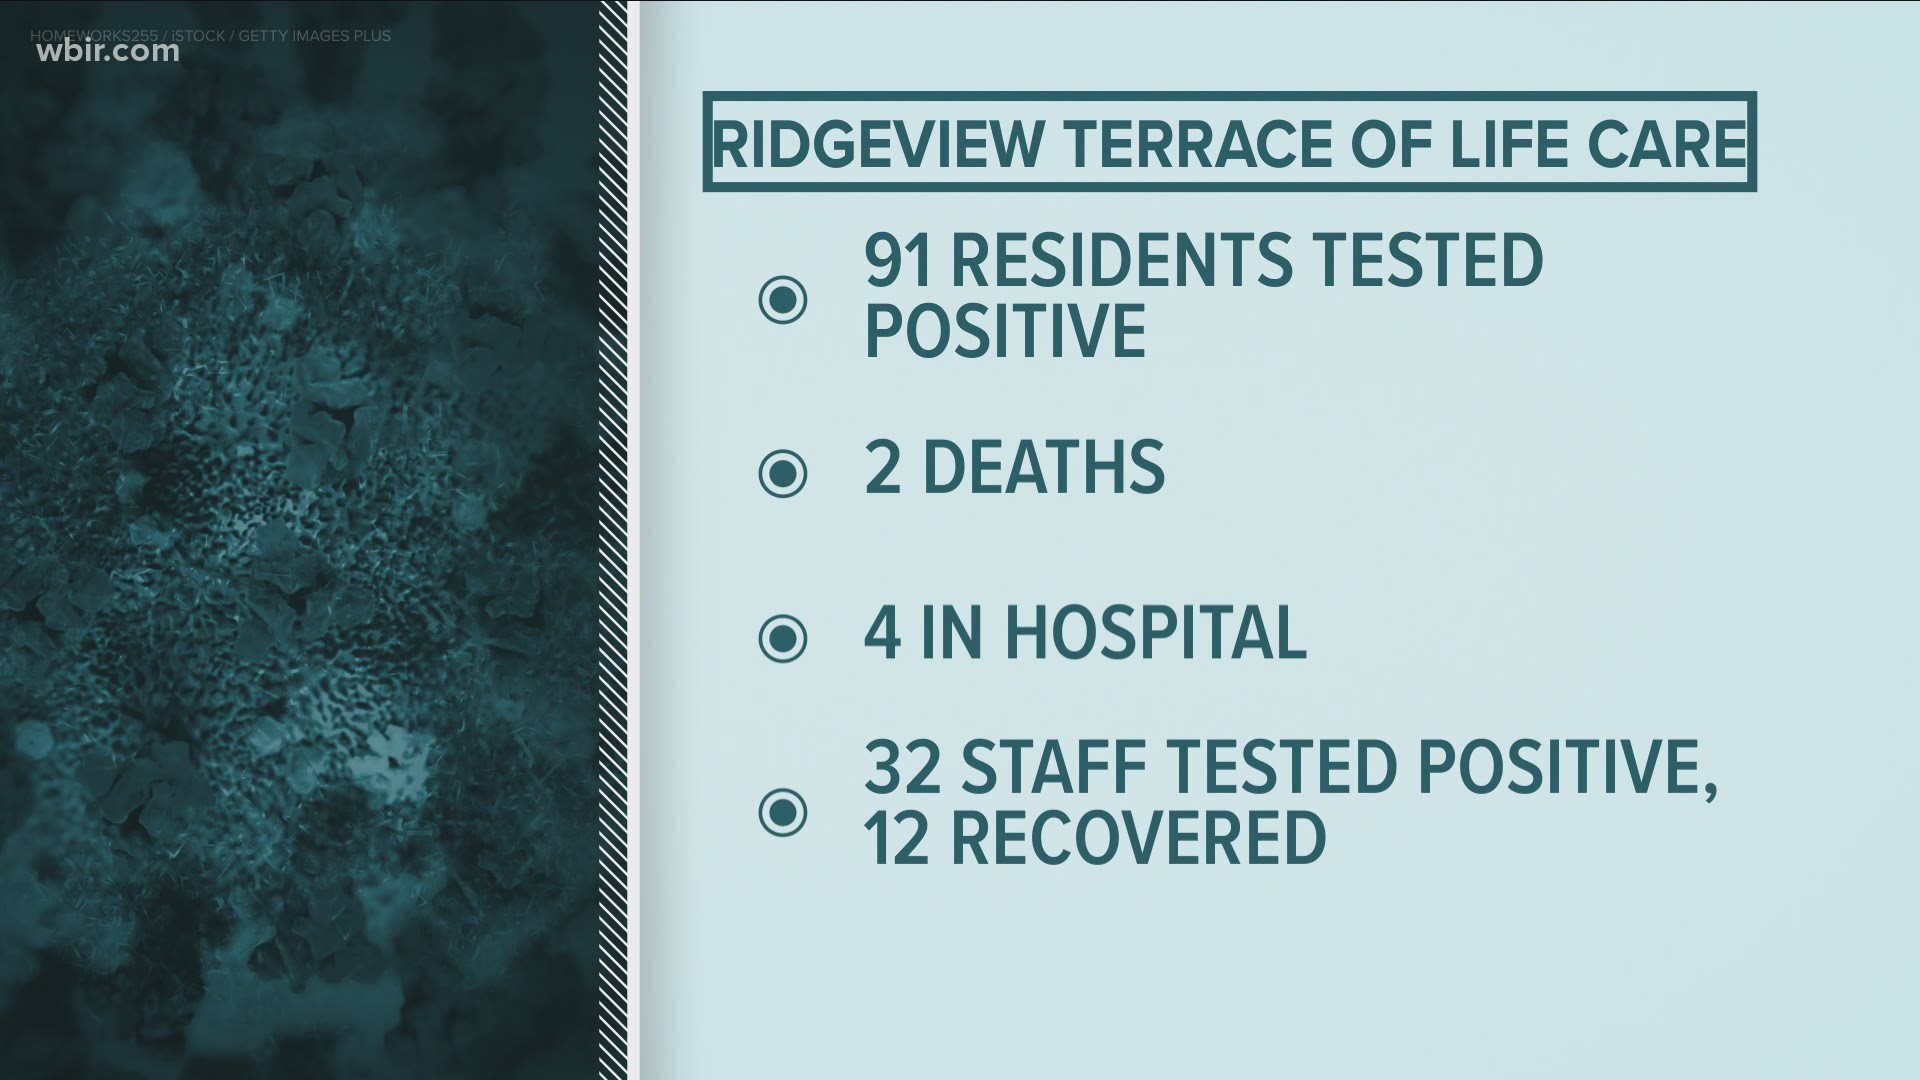 91 residents at Ridgeview Terrace of Life Care in Rutledge have tested positive for COVID-19. Two residents have died and four are in the hospital.